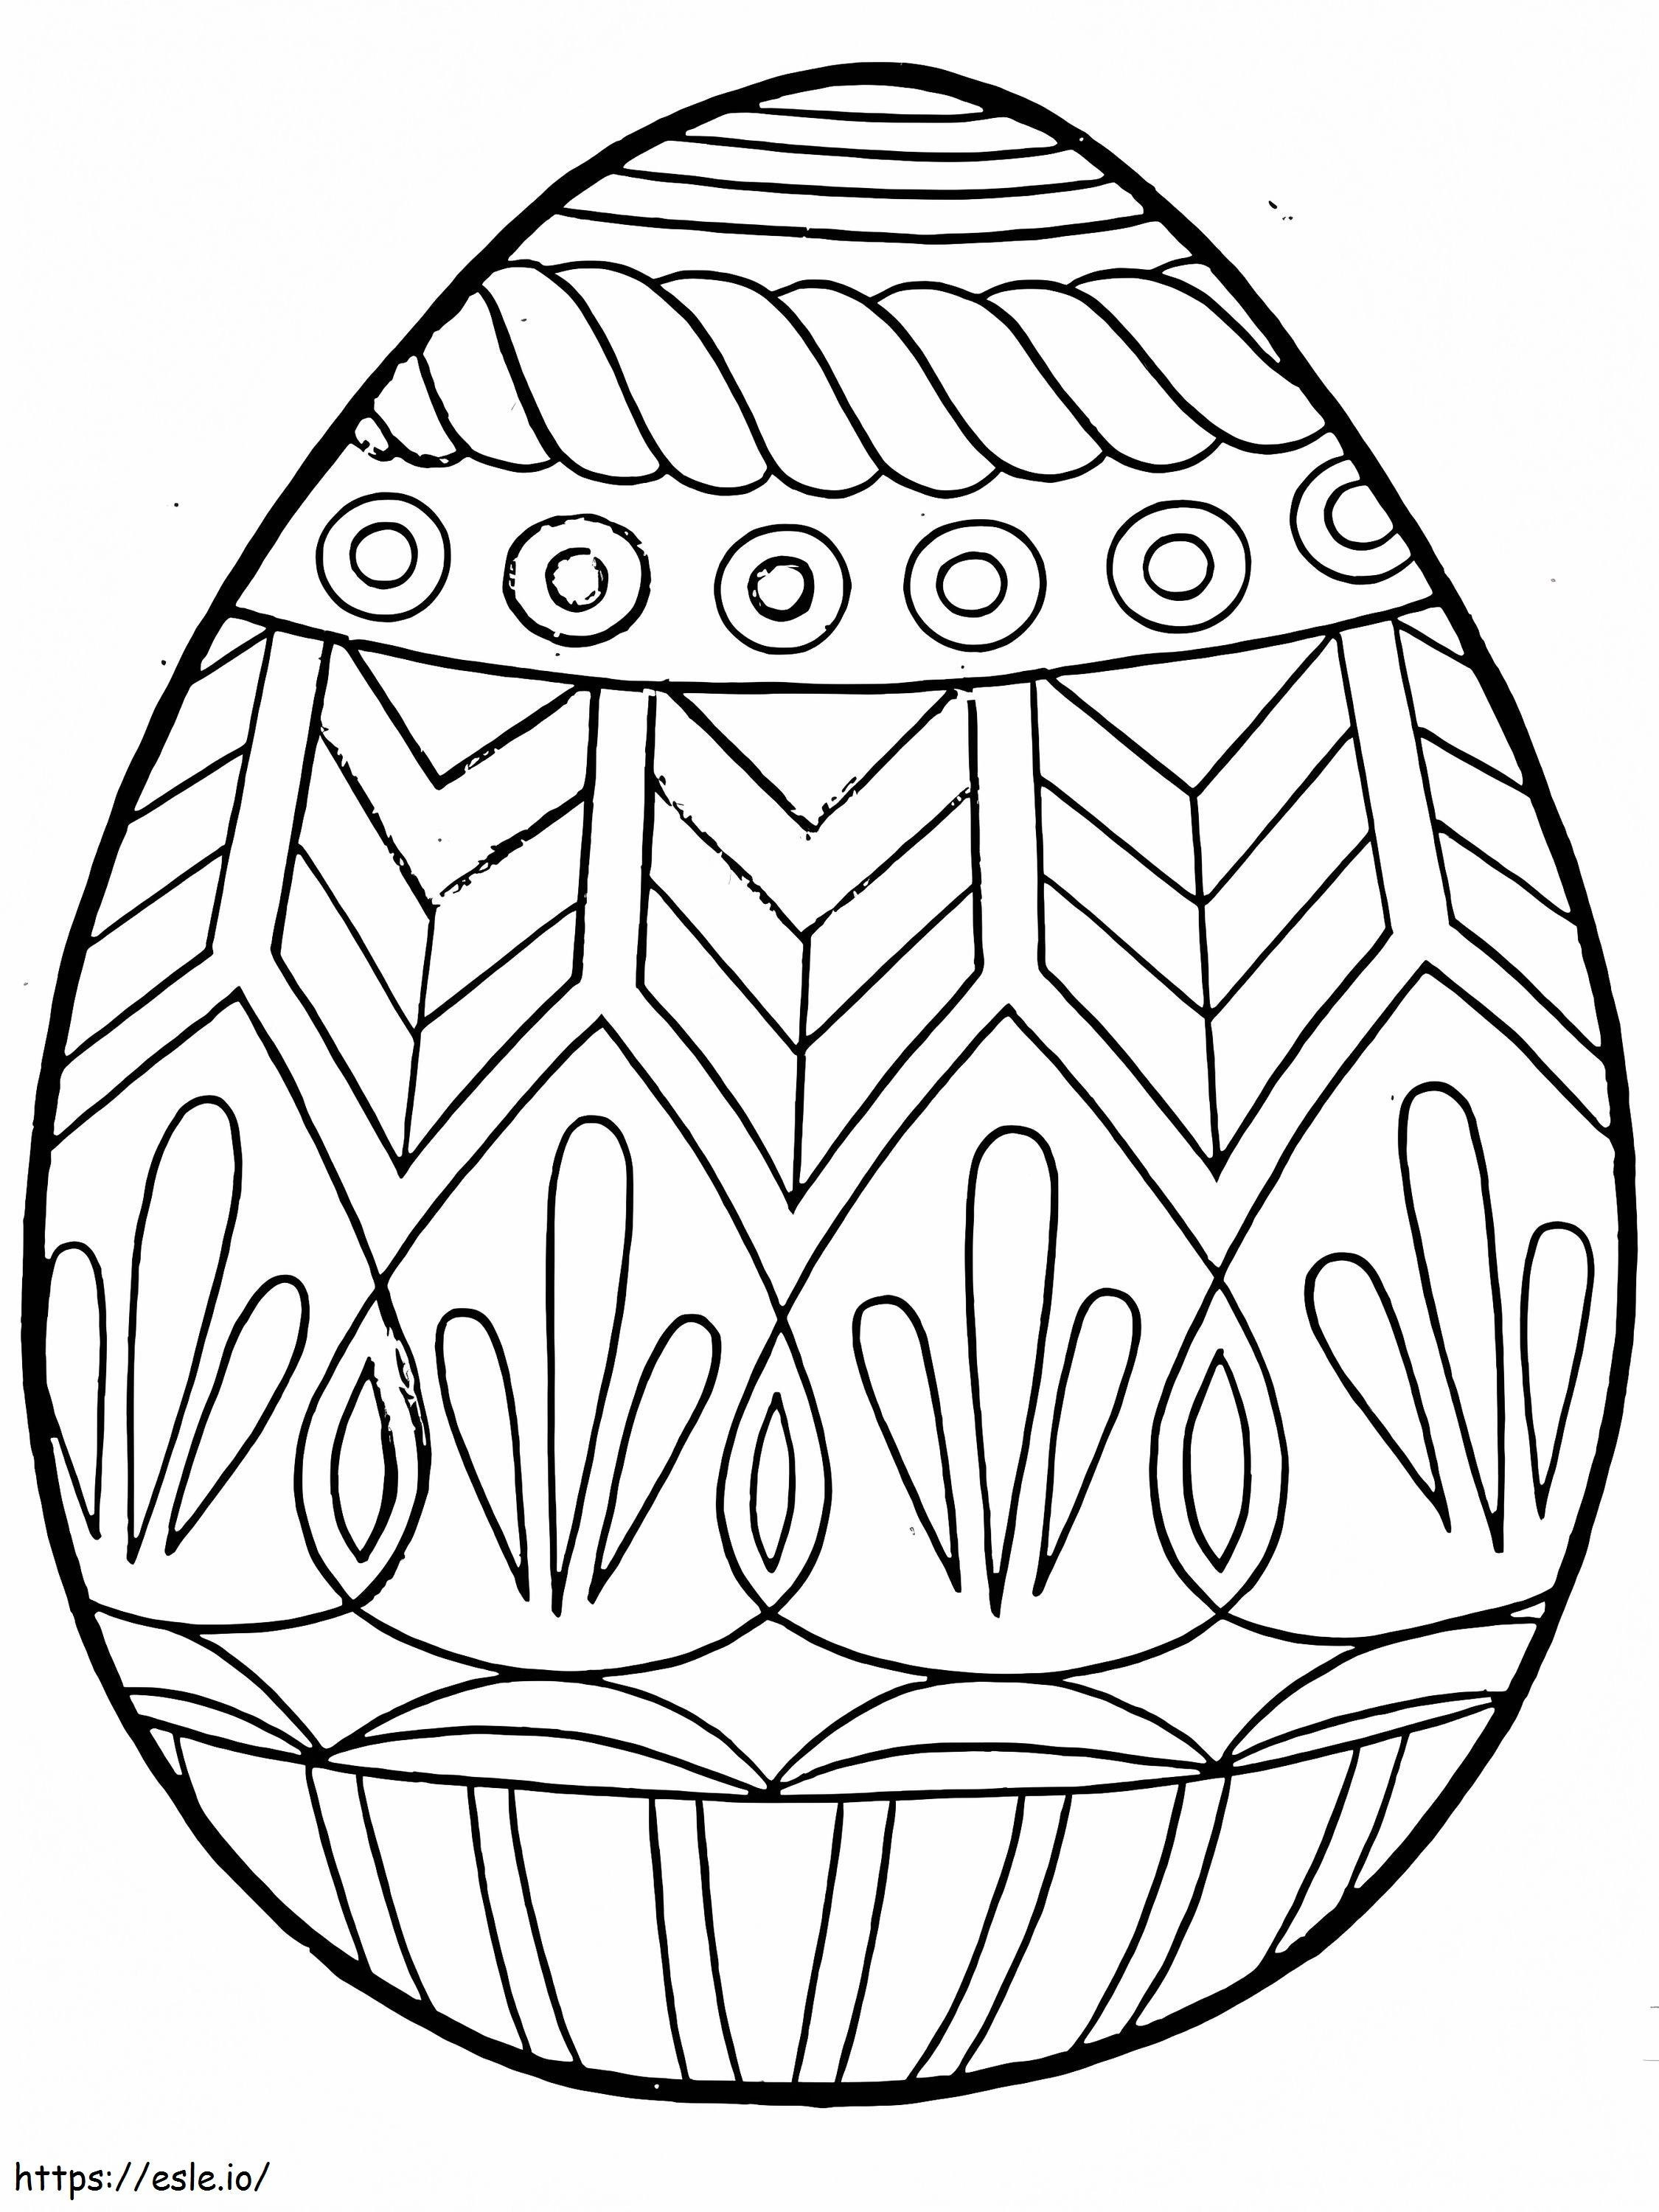 Cute Easter Egg 1 coloring page